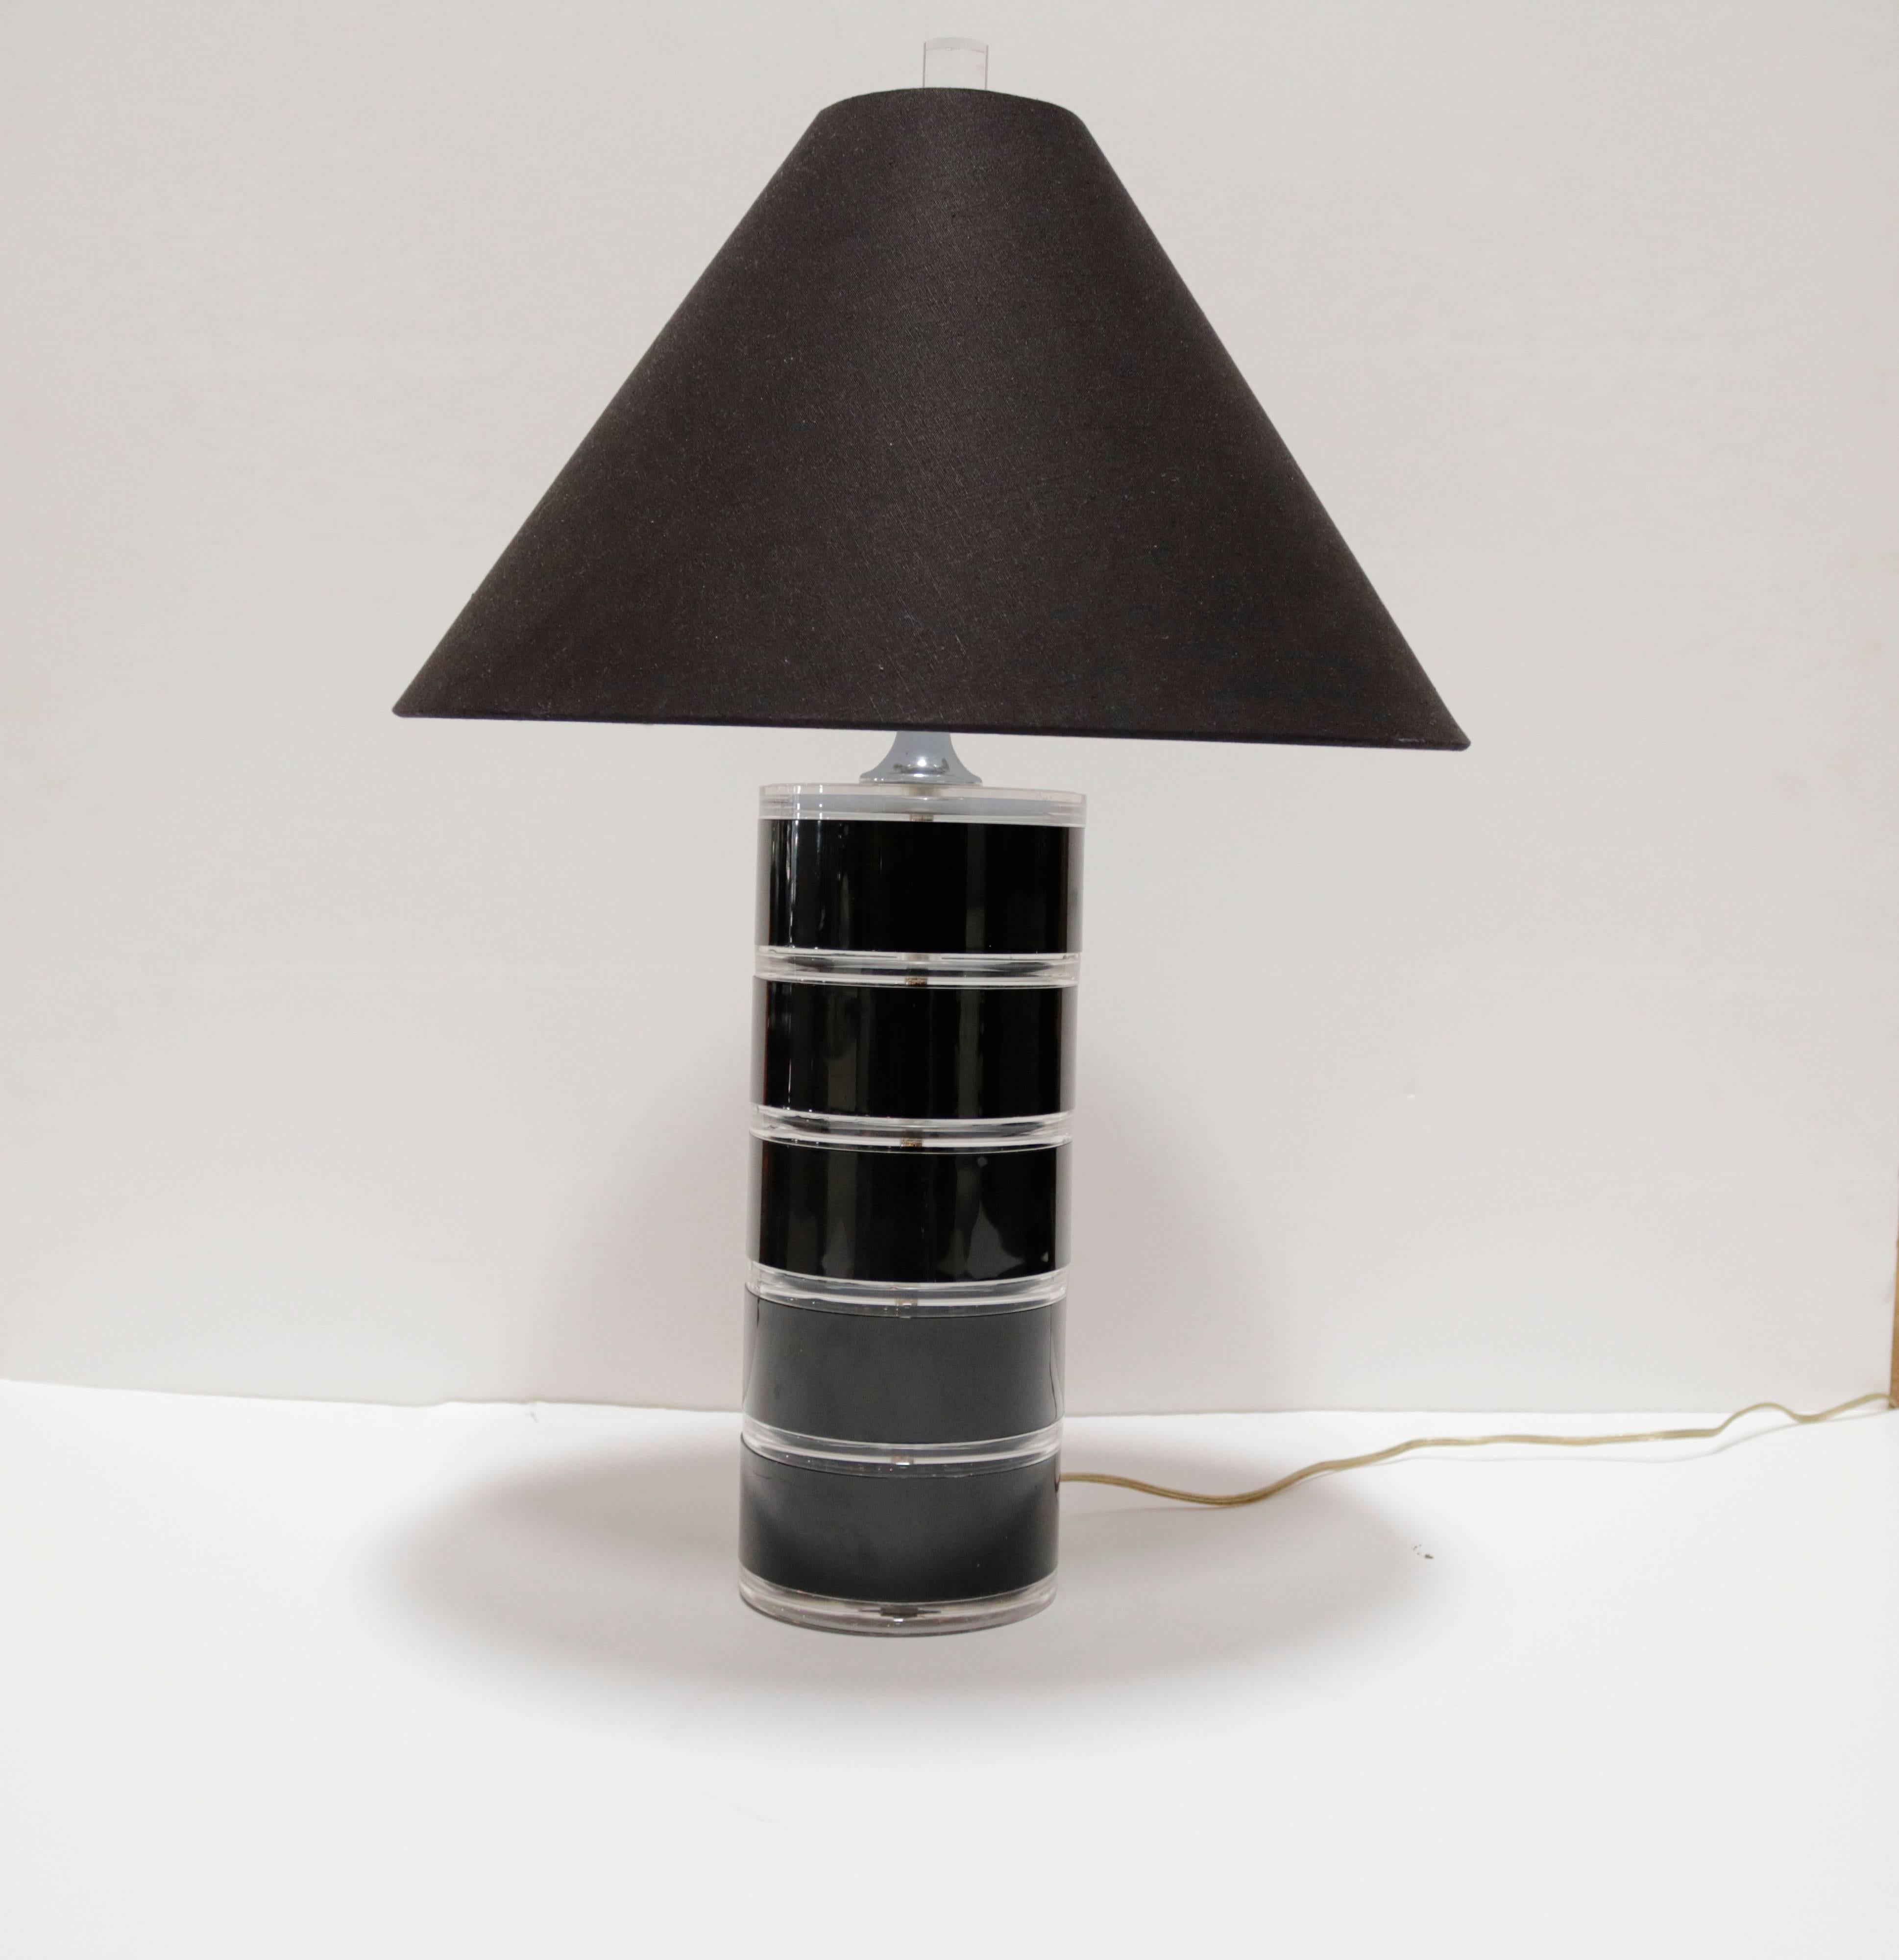 Cylinder shaped clear and black Lucite table lamp with new black paper shade. Lamp measures 25.0